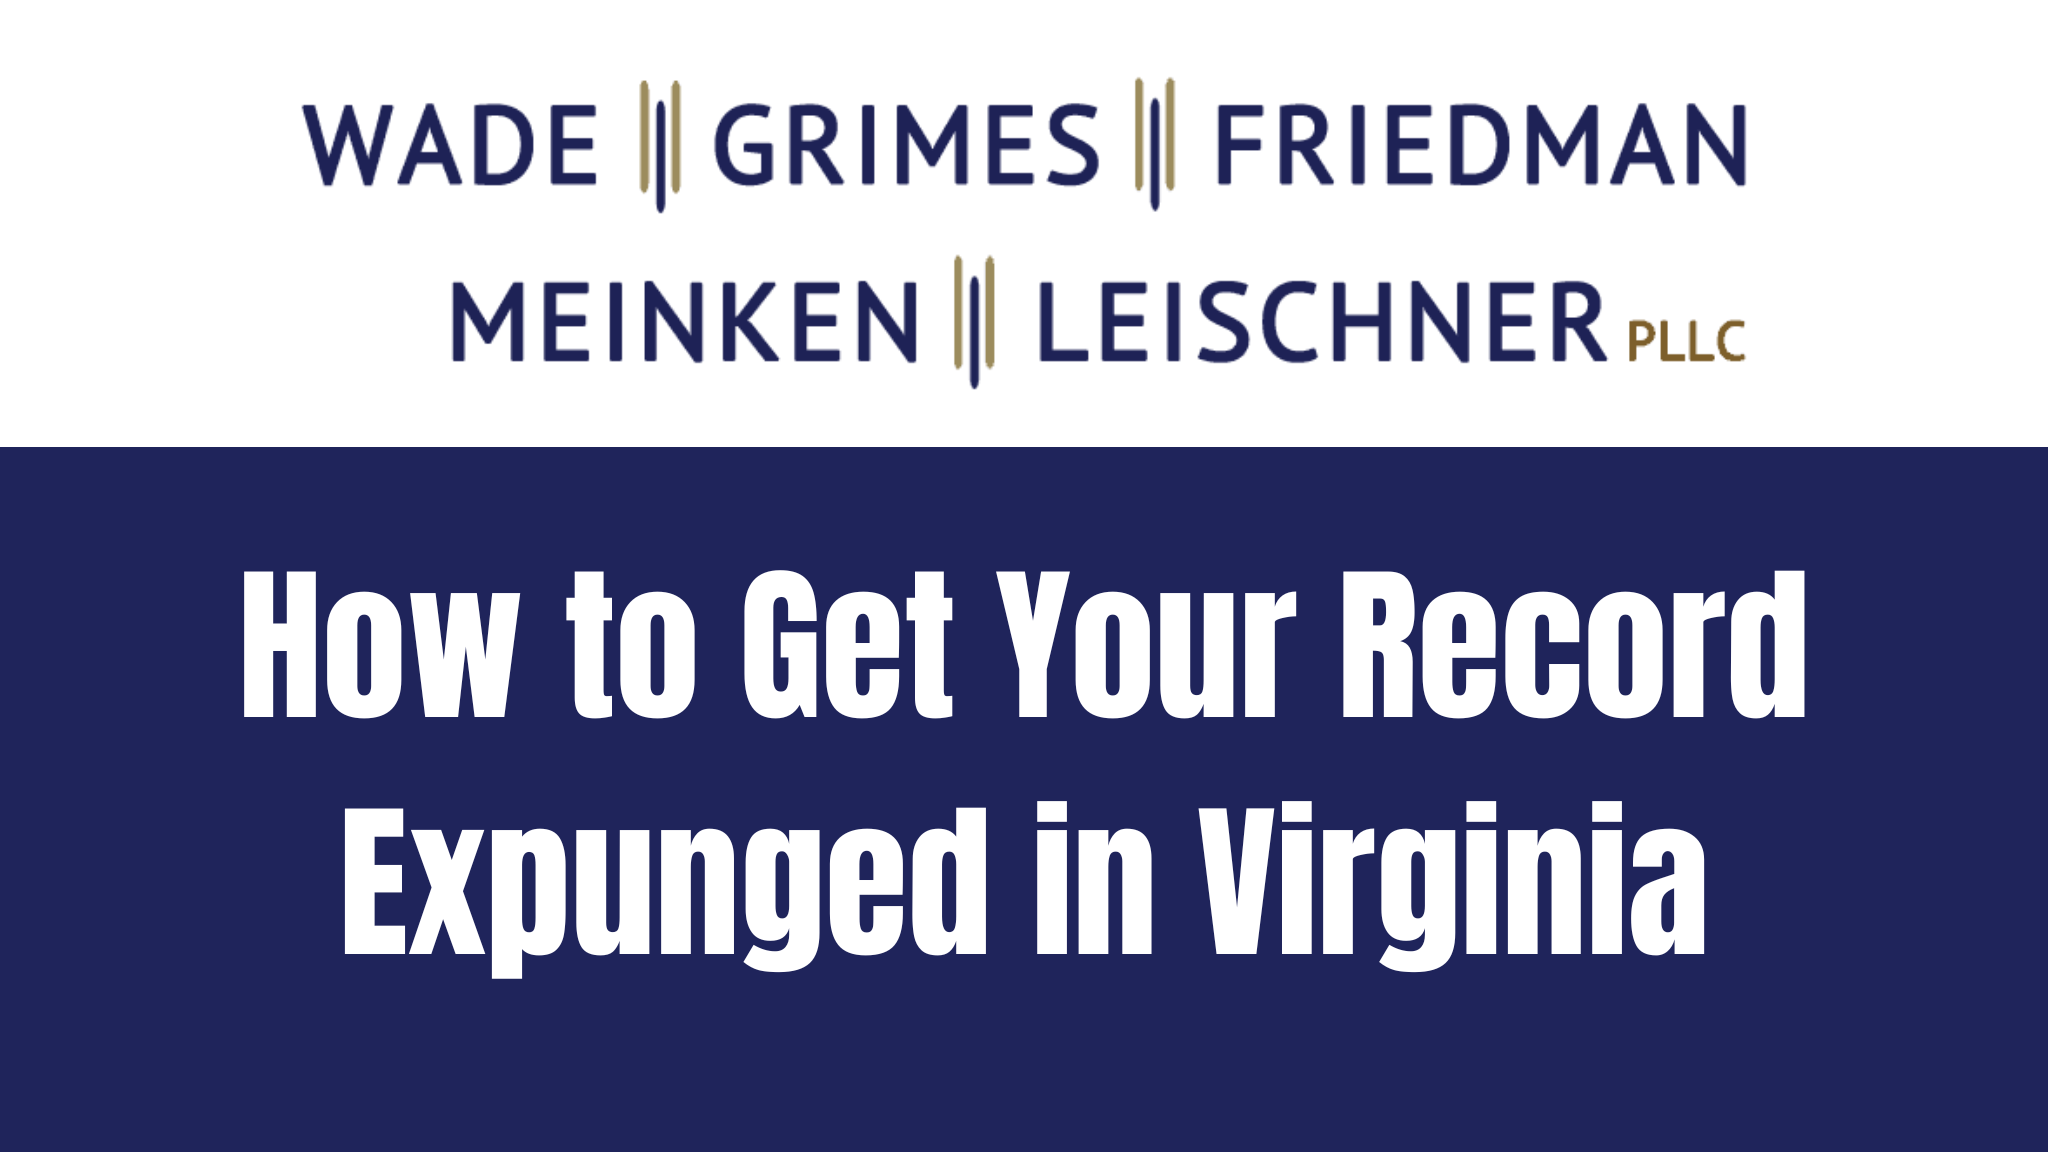 How to get your record expunged in Virginia